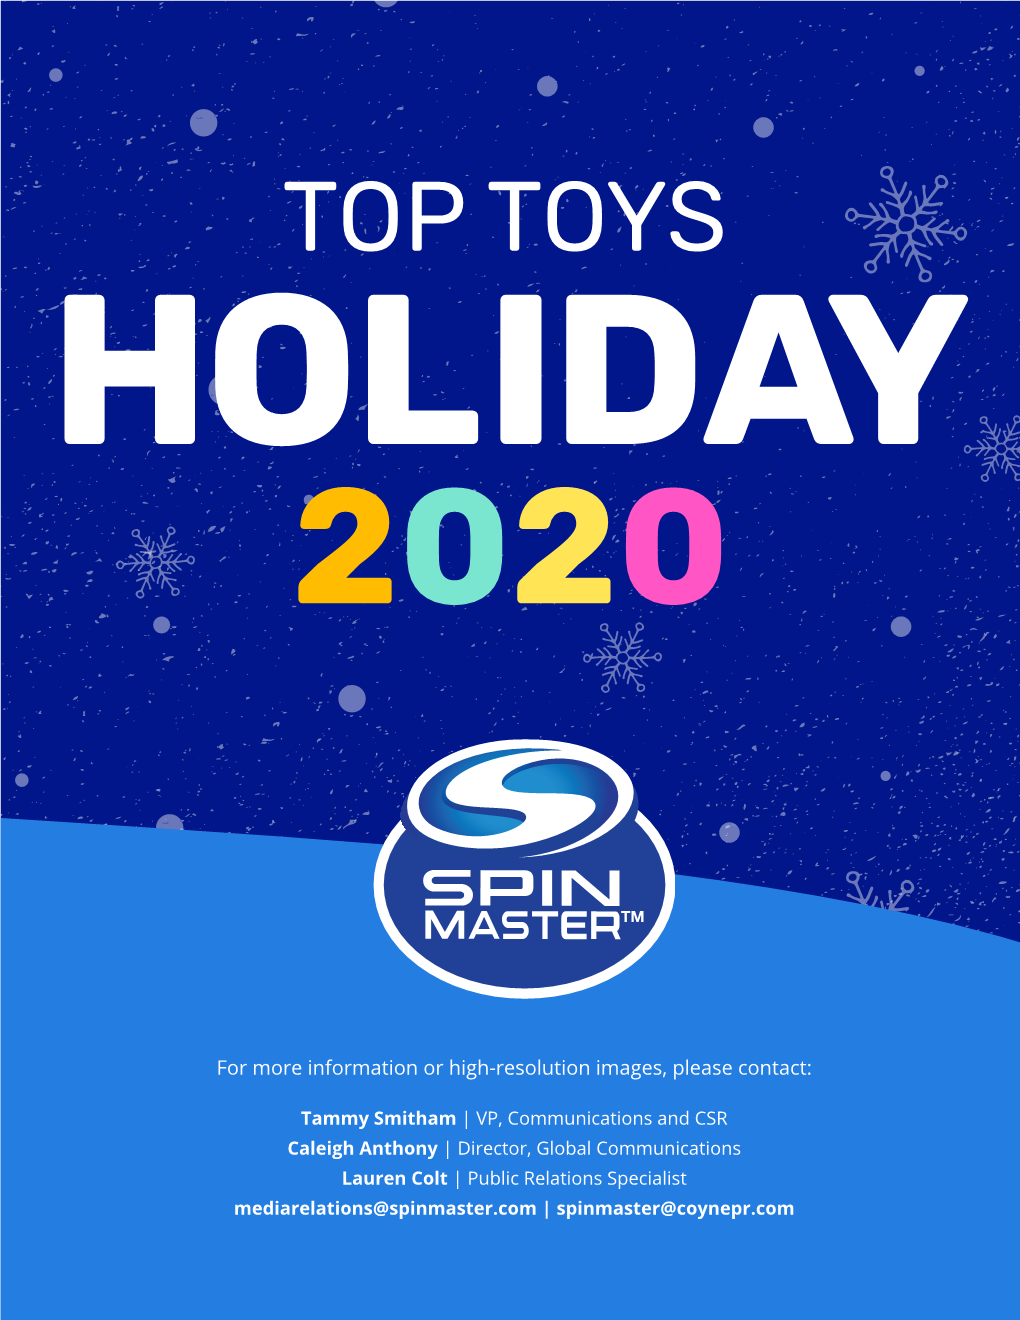 Top Toys Holiday 2020